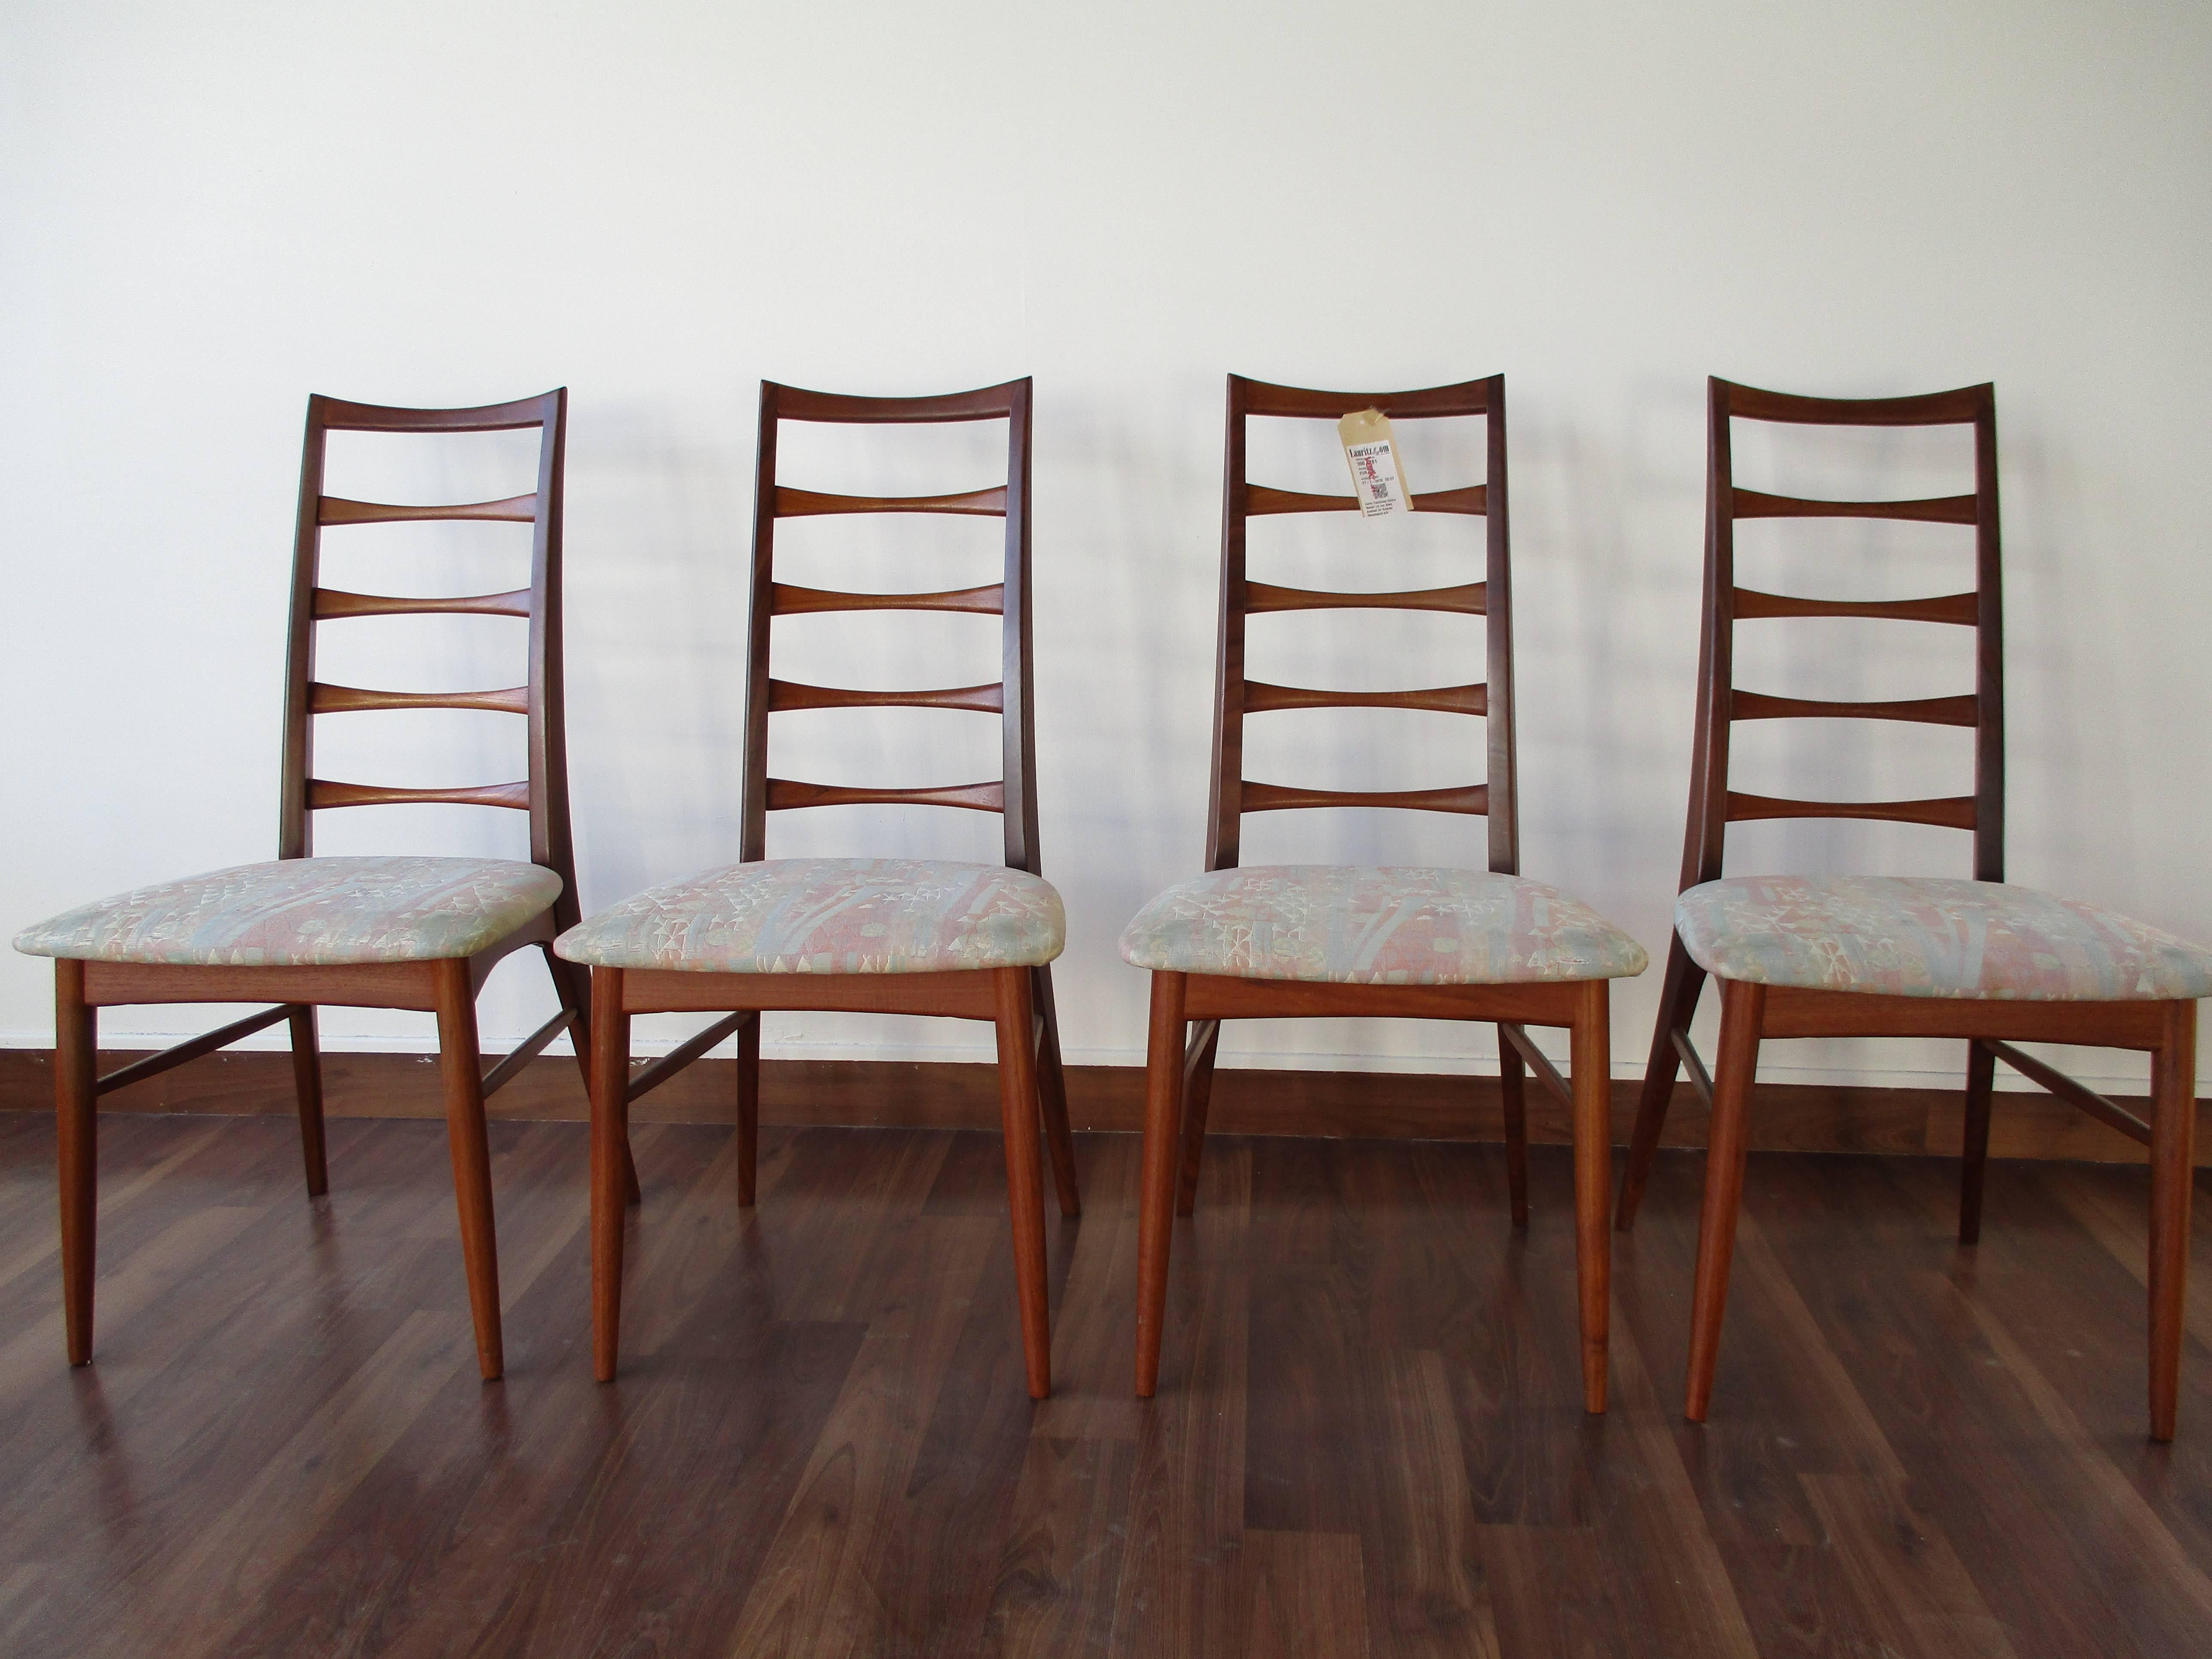 Four Teak Dining Chairs by Niels Kofoed In Excellent Condition For Sale In Ottawa, ON